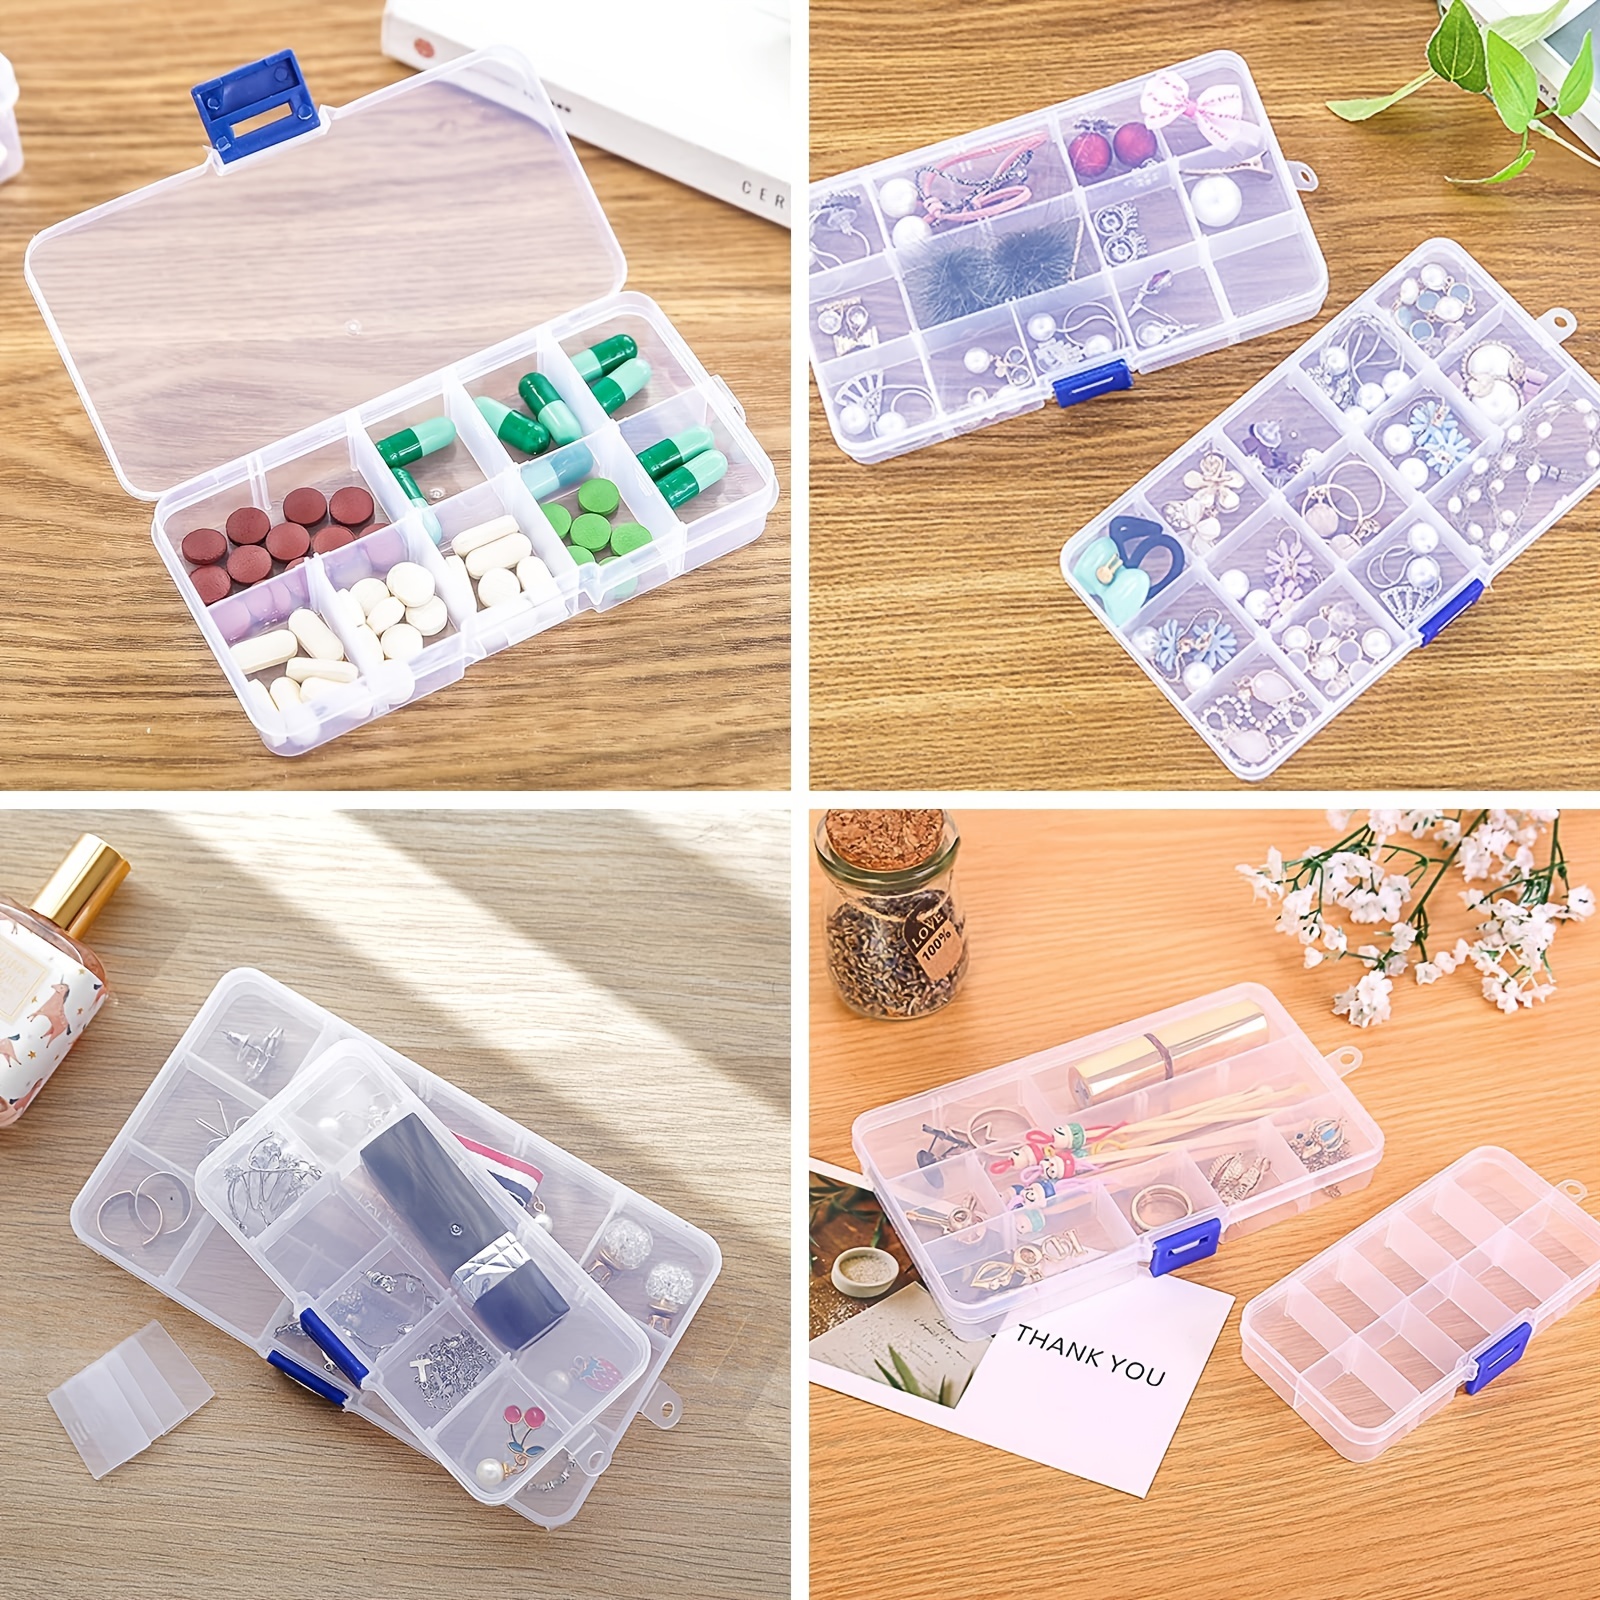 12 Pack: Plastic Bead Organizer with Removable Tray by Simply Tidy